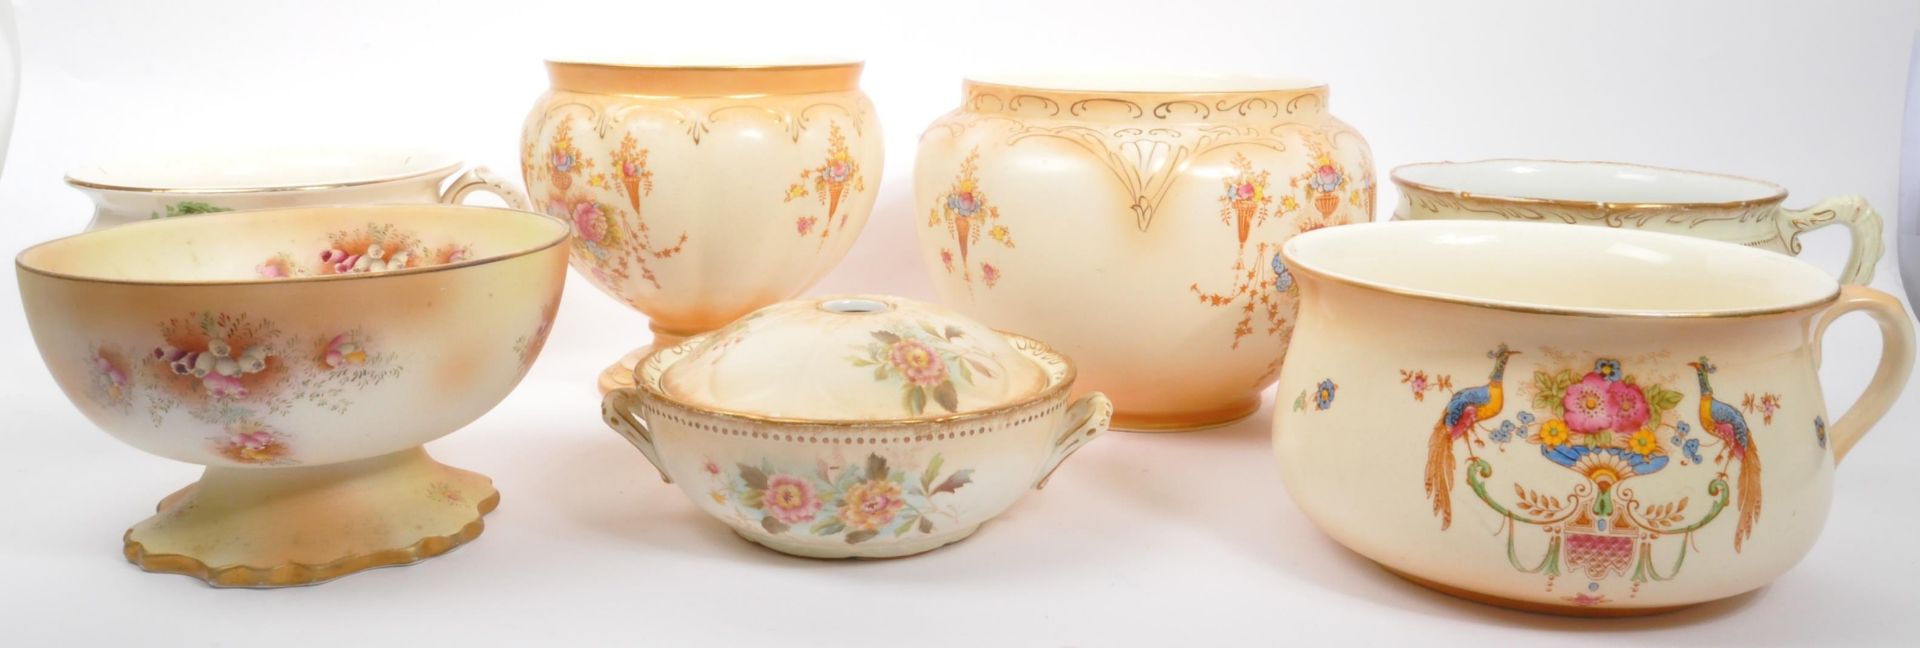 COLLECTION OF EARLY 20TH CENTURY IVORY BLUSH BONE CHINA